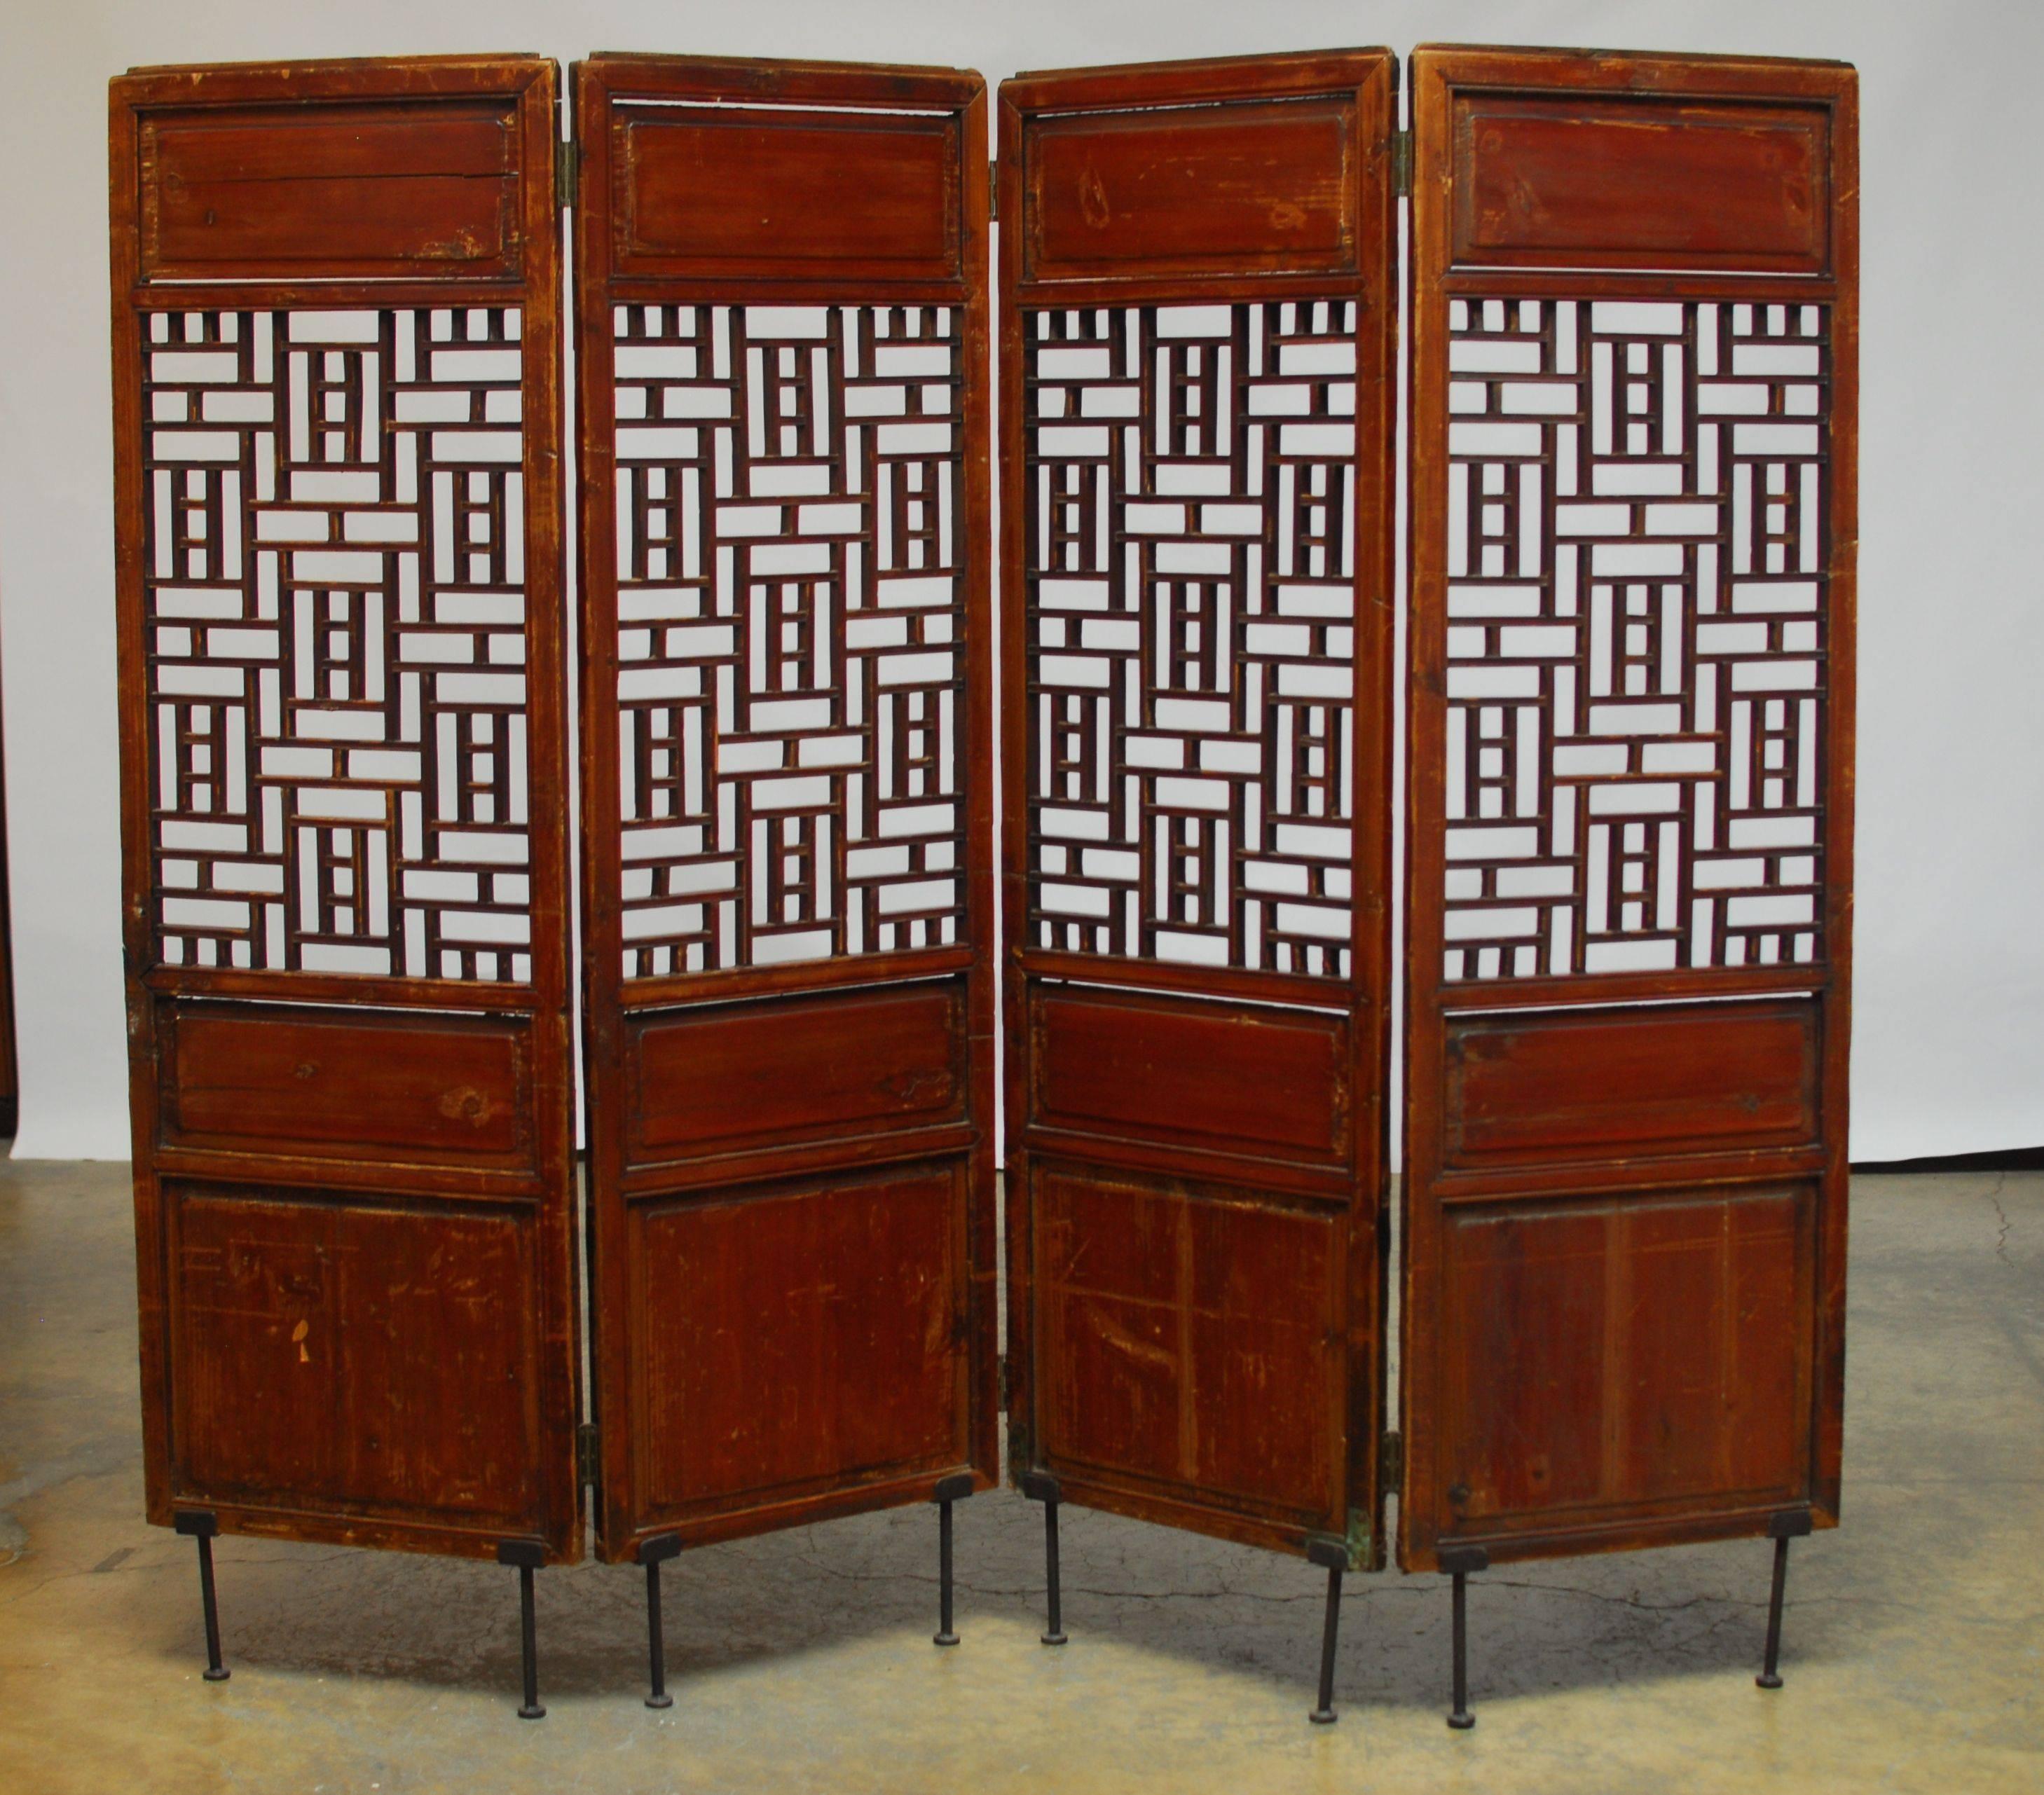 19th century Chinese screen featuring a geometric lattice window in each panel. Constructed with old world mortise and tenon joinery and mounted on iron feet. Originally four separate carved elm panels now joined and lifted for display.
   